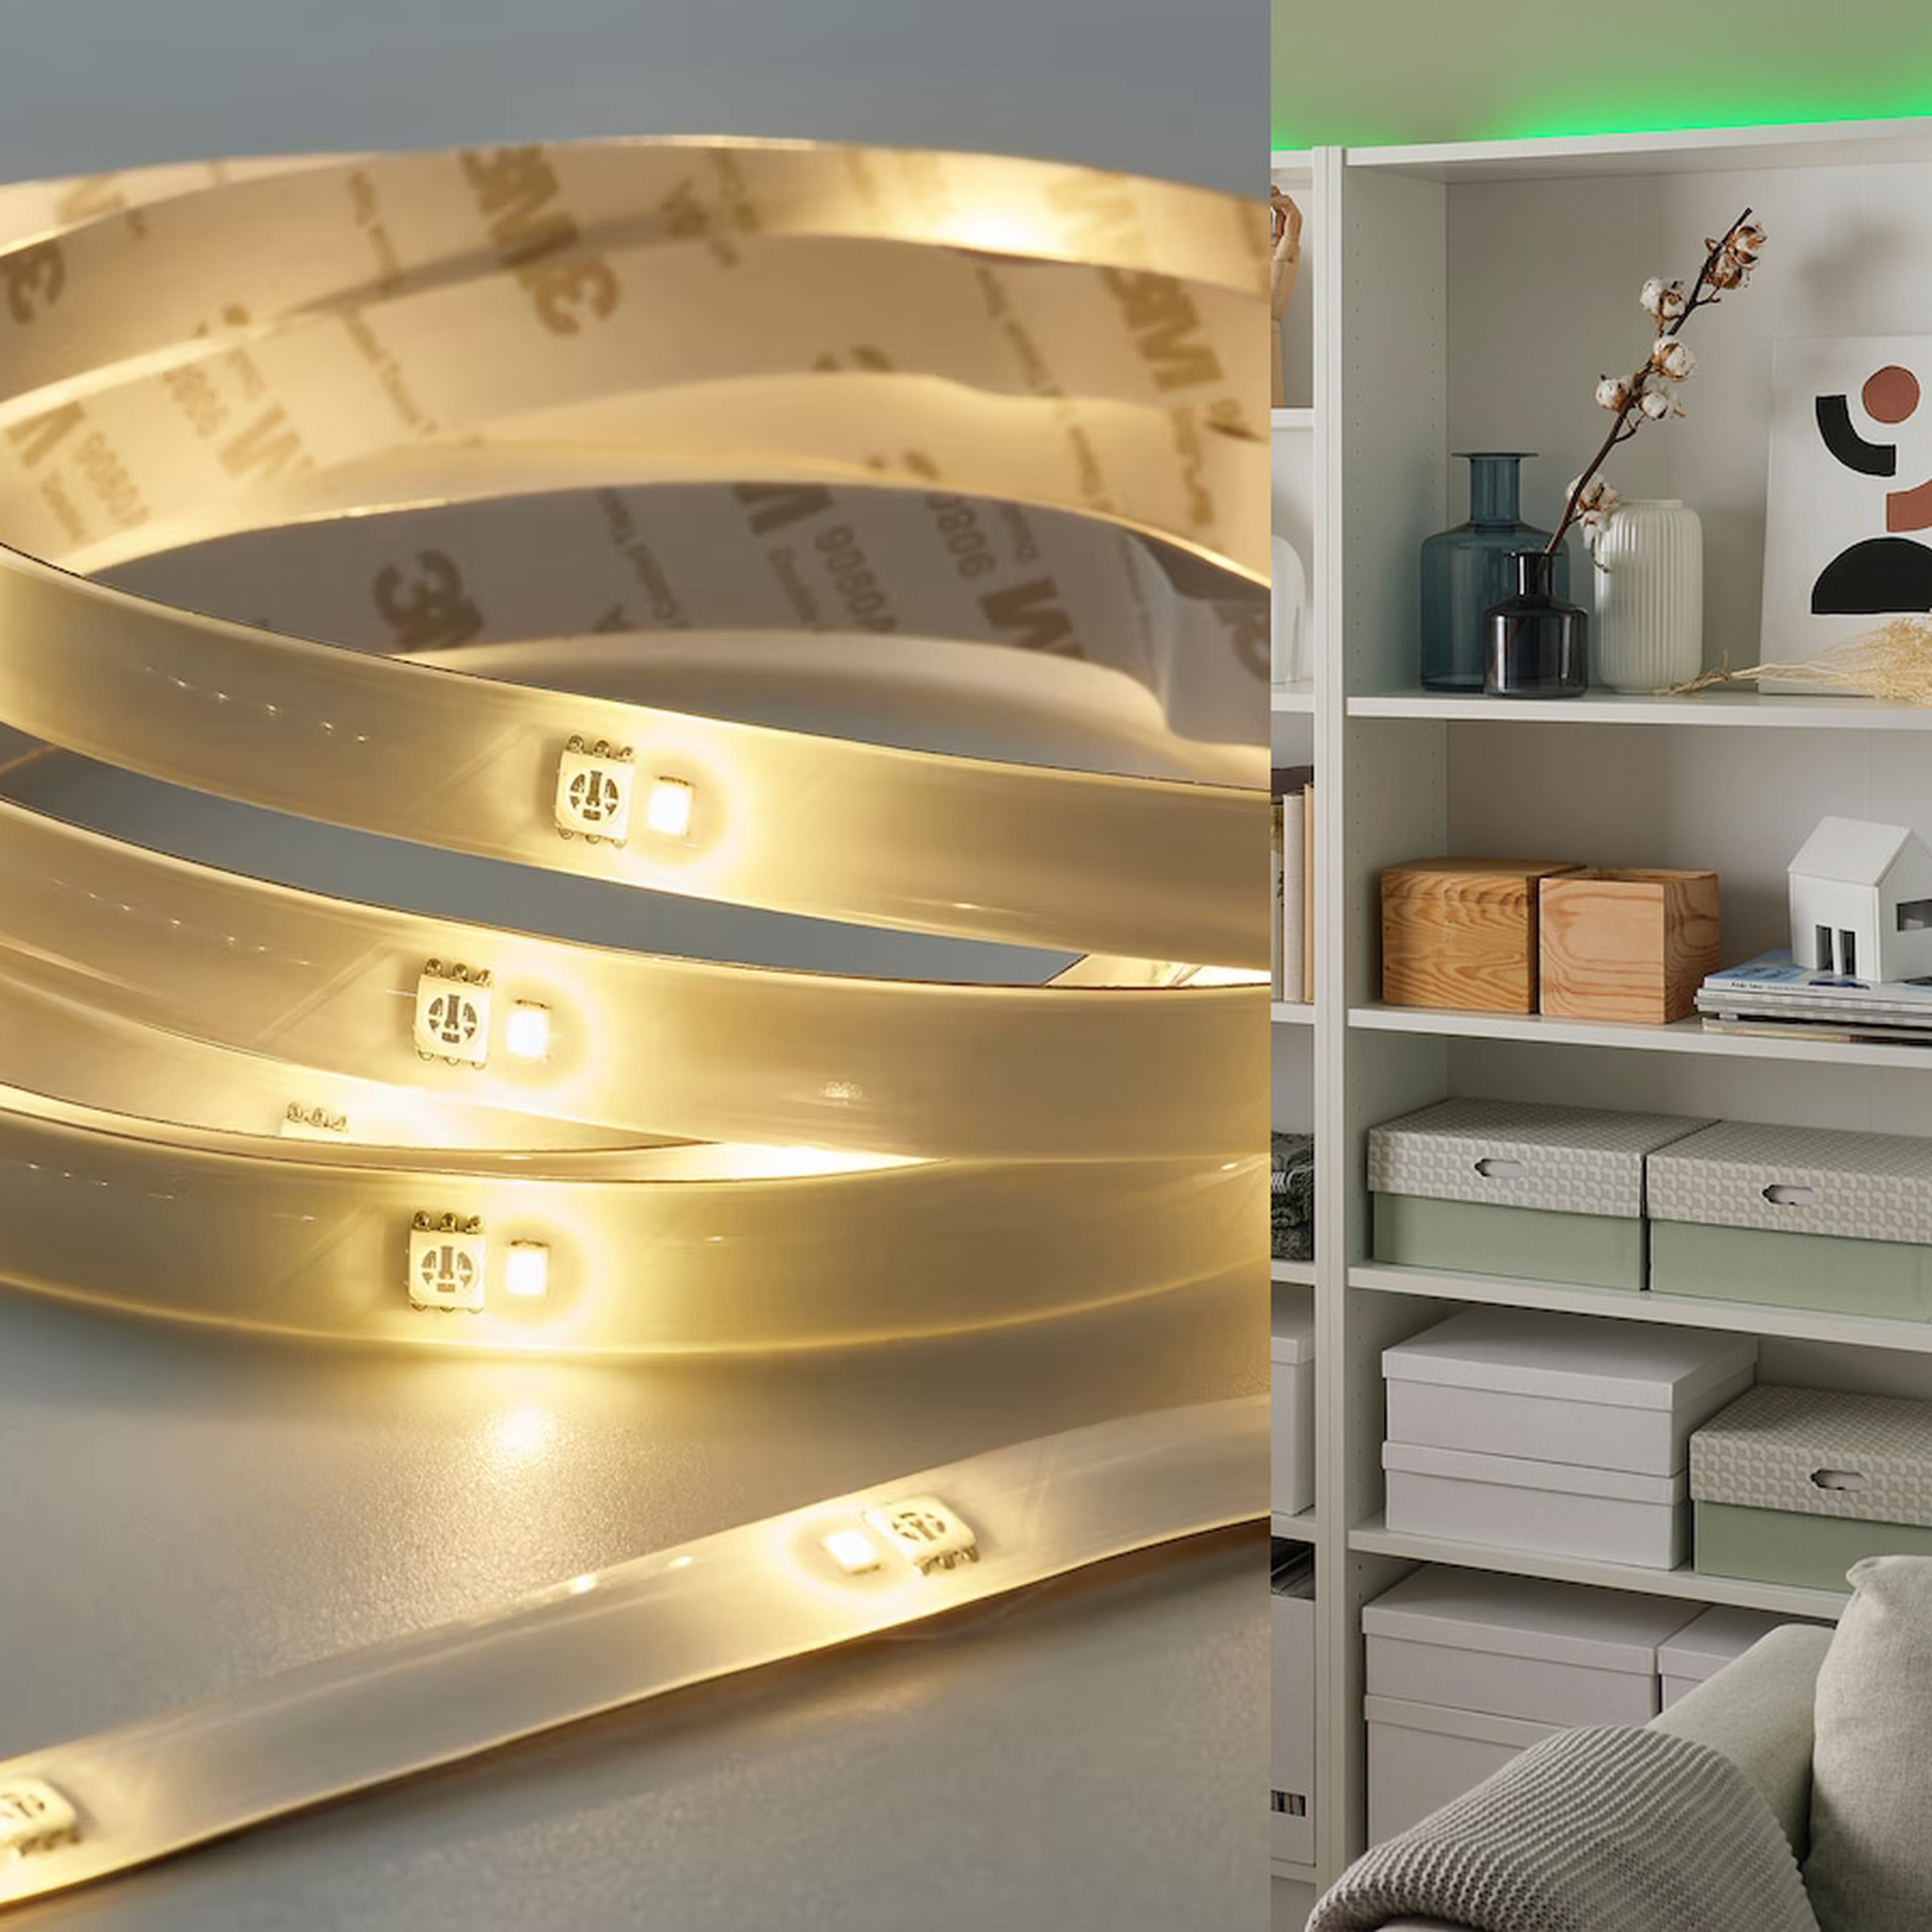 A collage of two images — the light strip coiled on a surface and shining gold and the light strip outlining the back of a book shelf, in green.